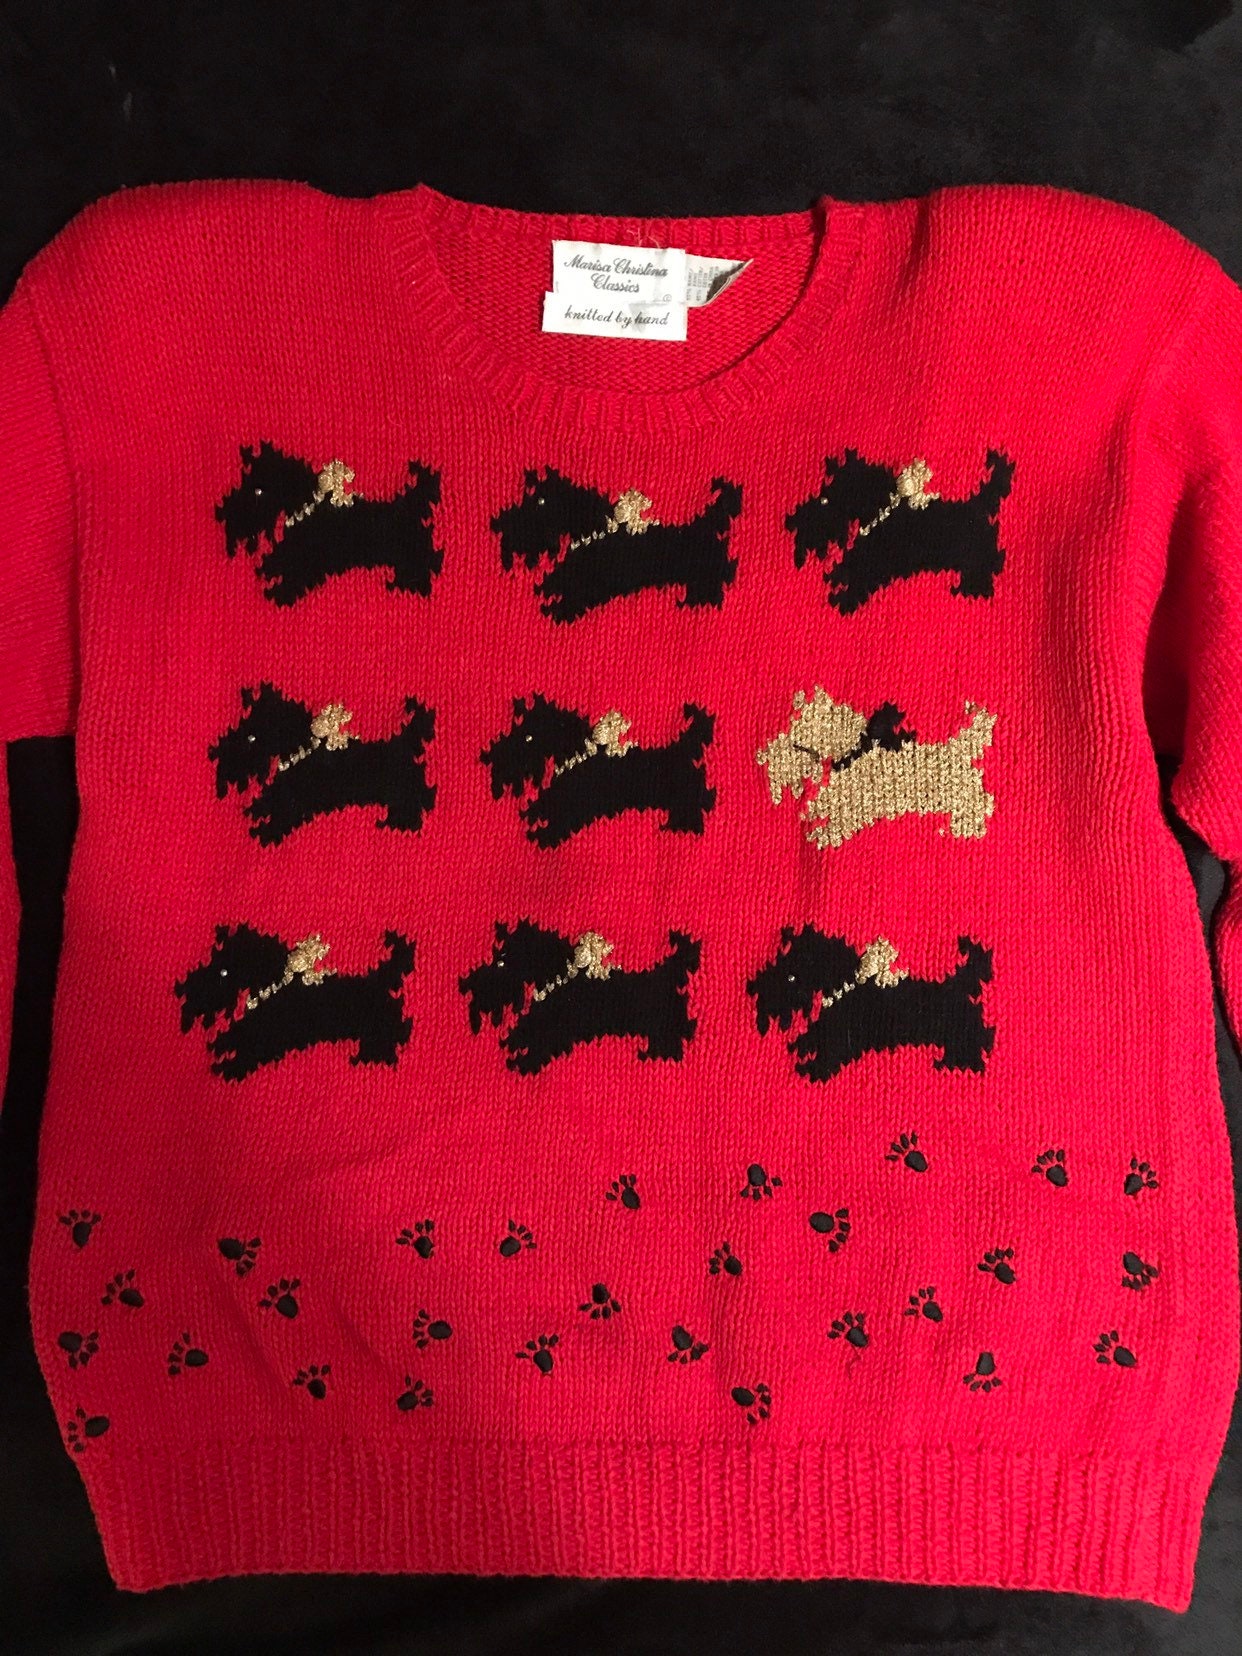 Ugly Dog Sweater. 1980's Red Scottie Dog Sweater. Ugly Red Dog Sweater ...